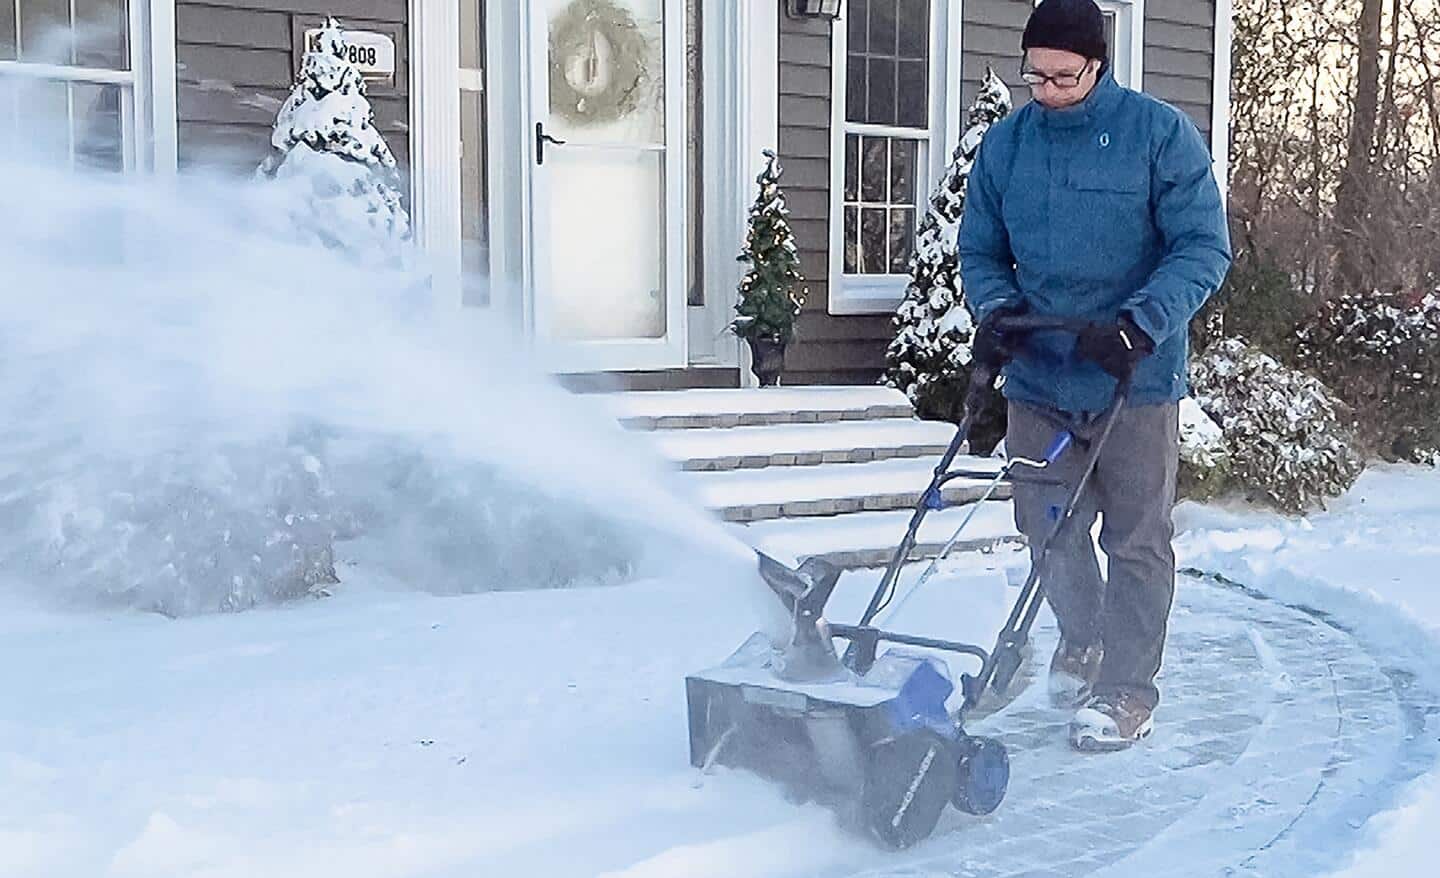 A blue cordless snow blower clearing a path in front of a house.